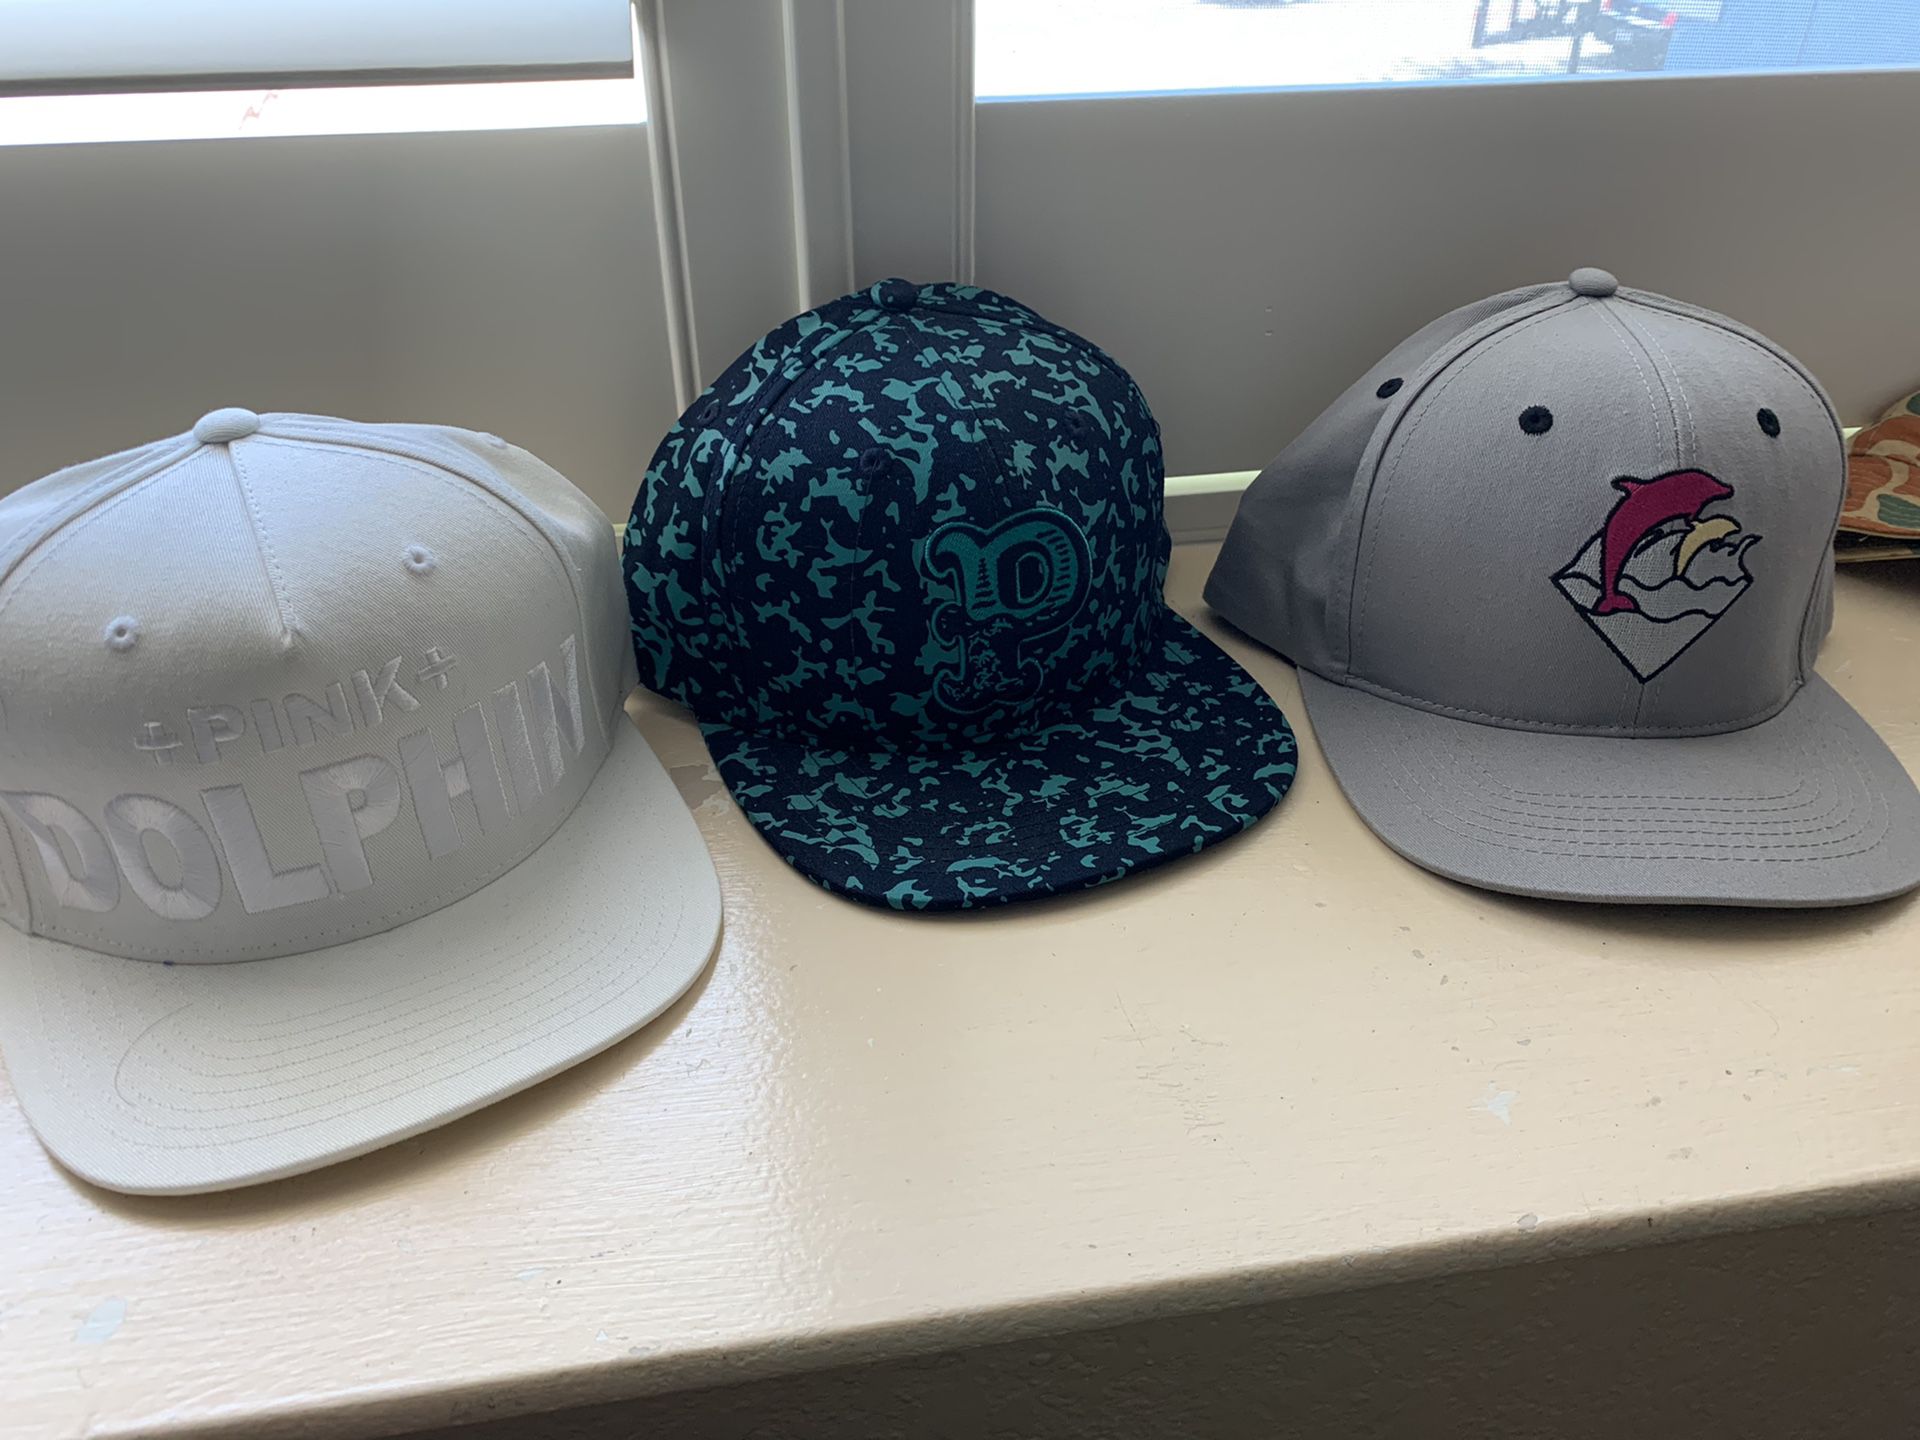 Pink Dolphin hats and beanie